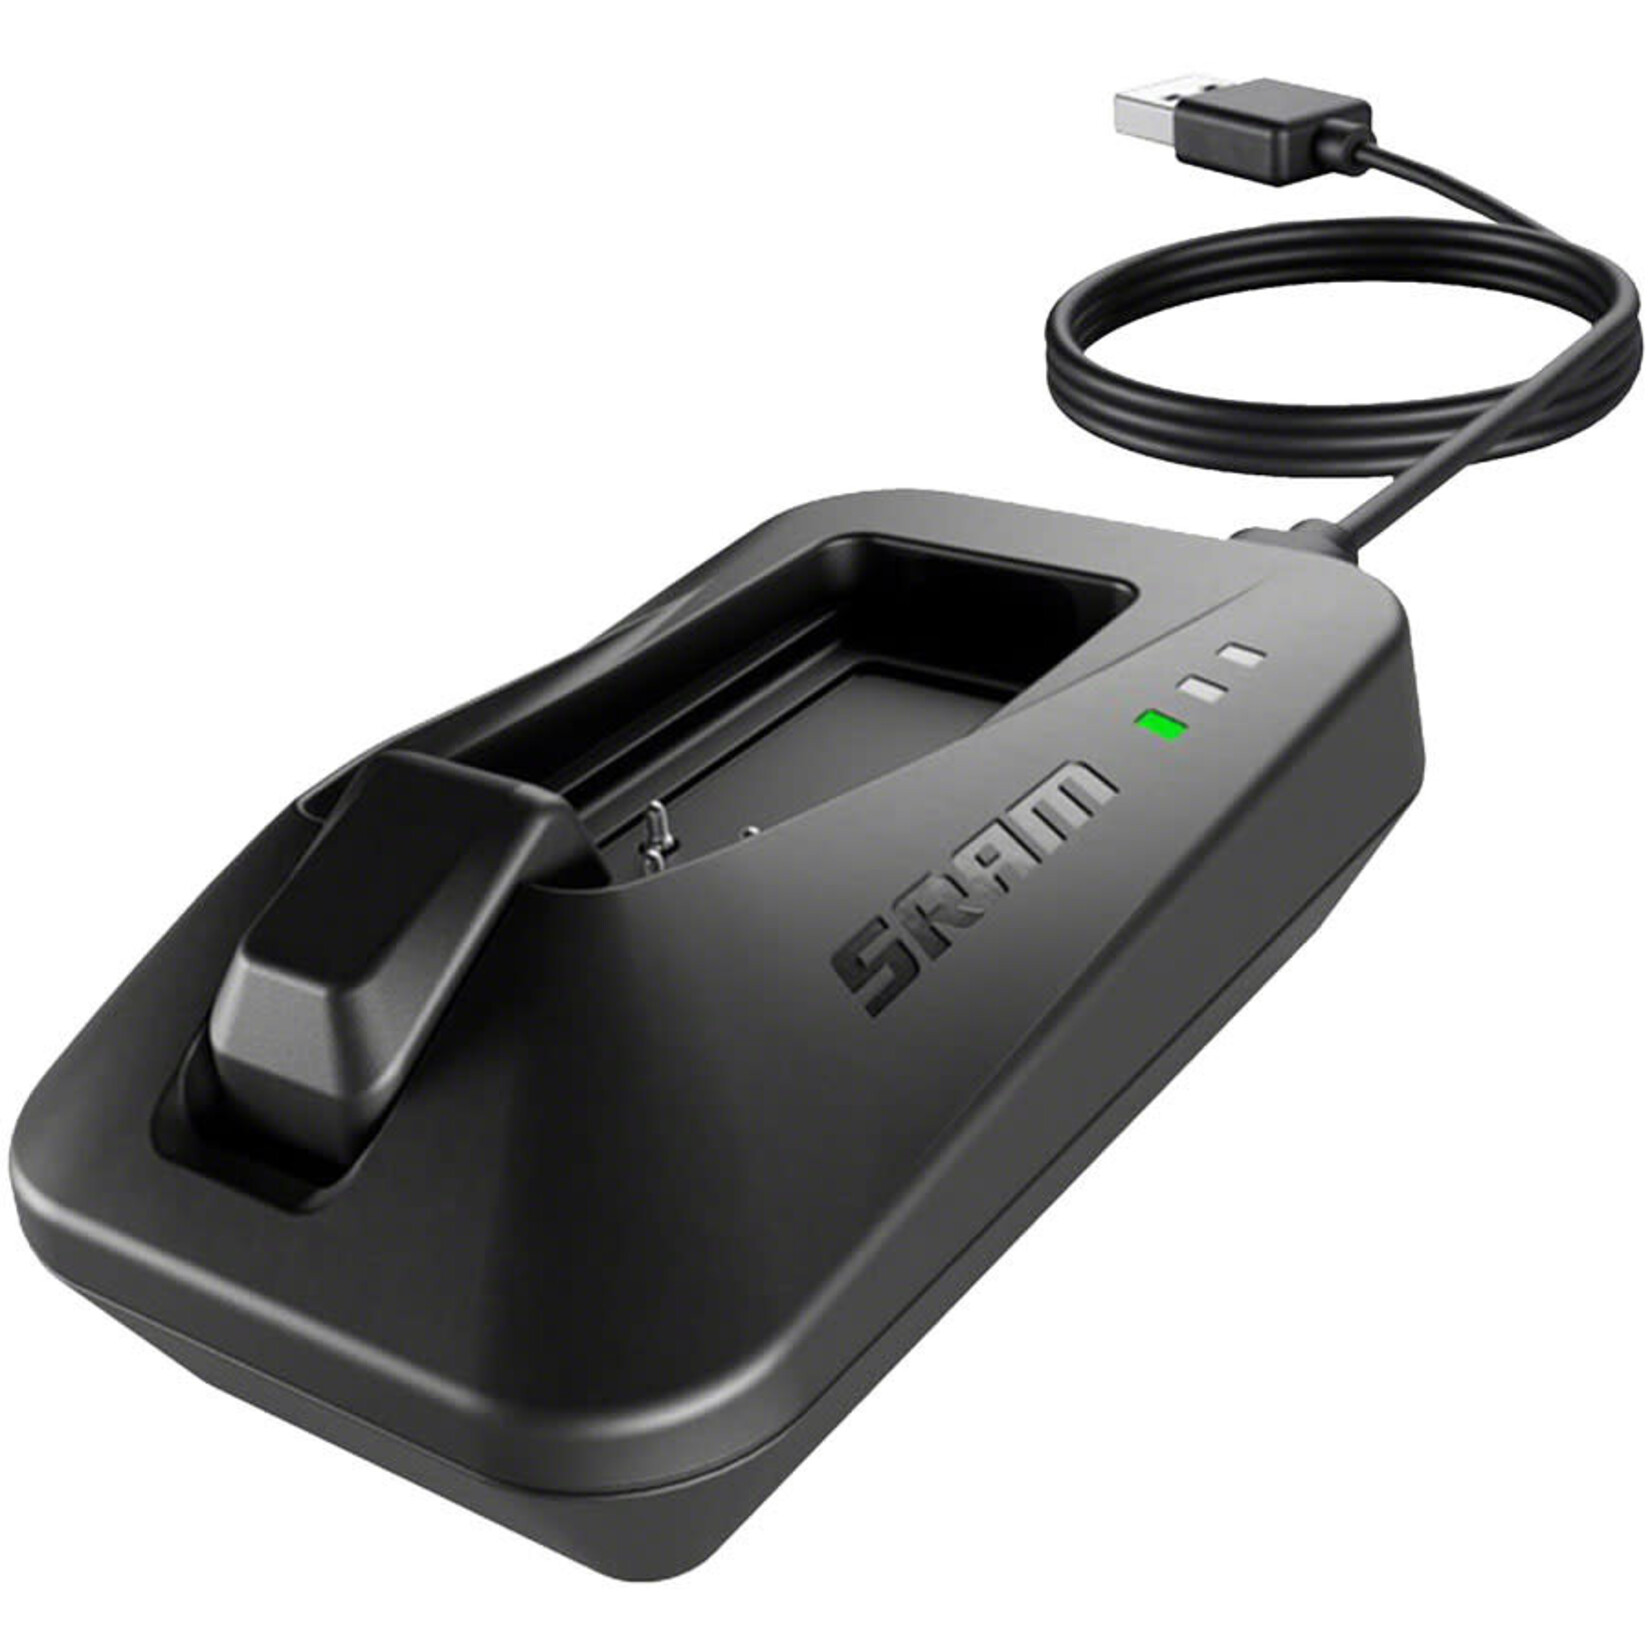 SRAM SRAM eTap and eTap AXS Battery Charger and Cord (Battery not included)